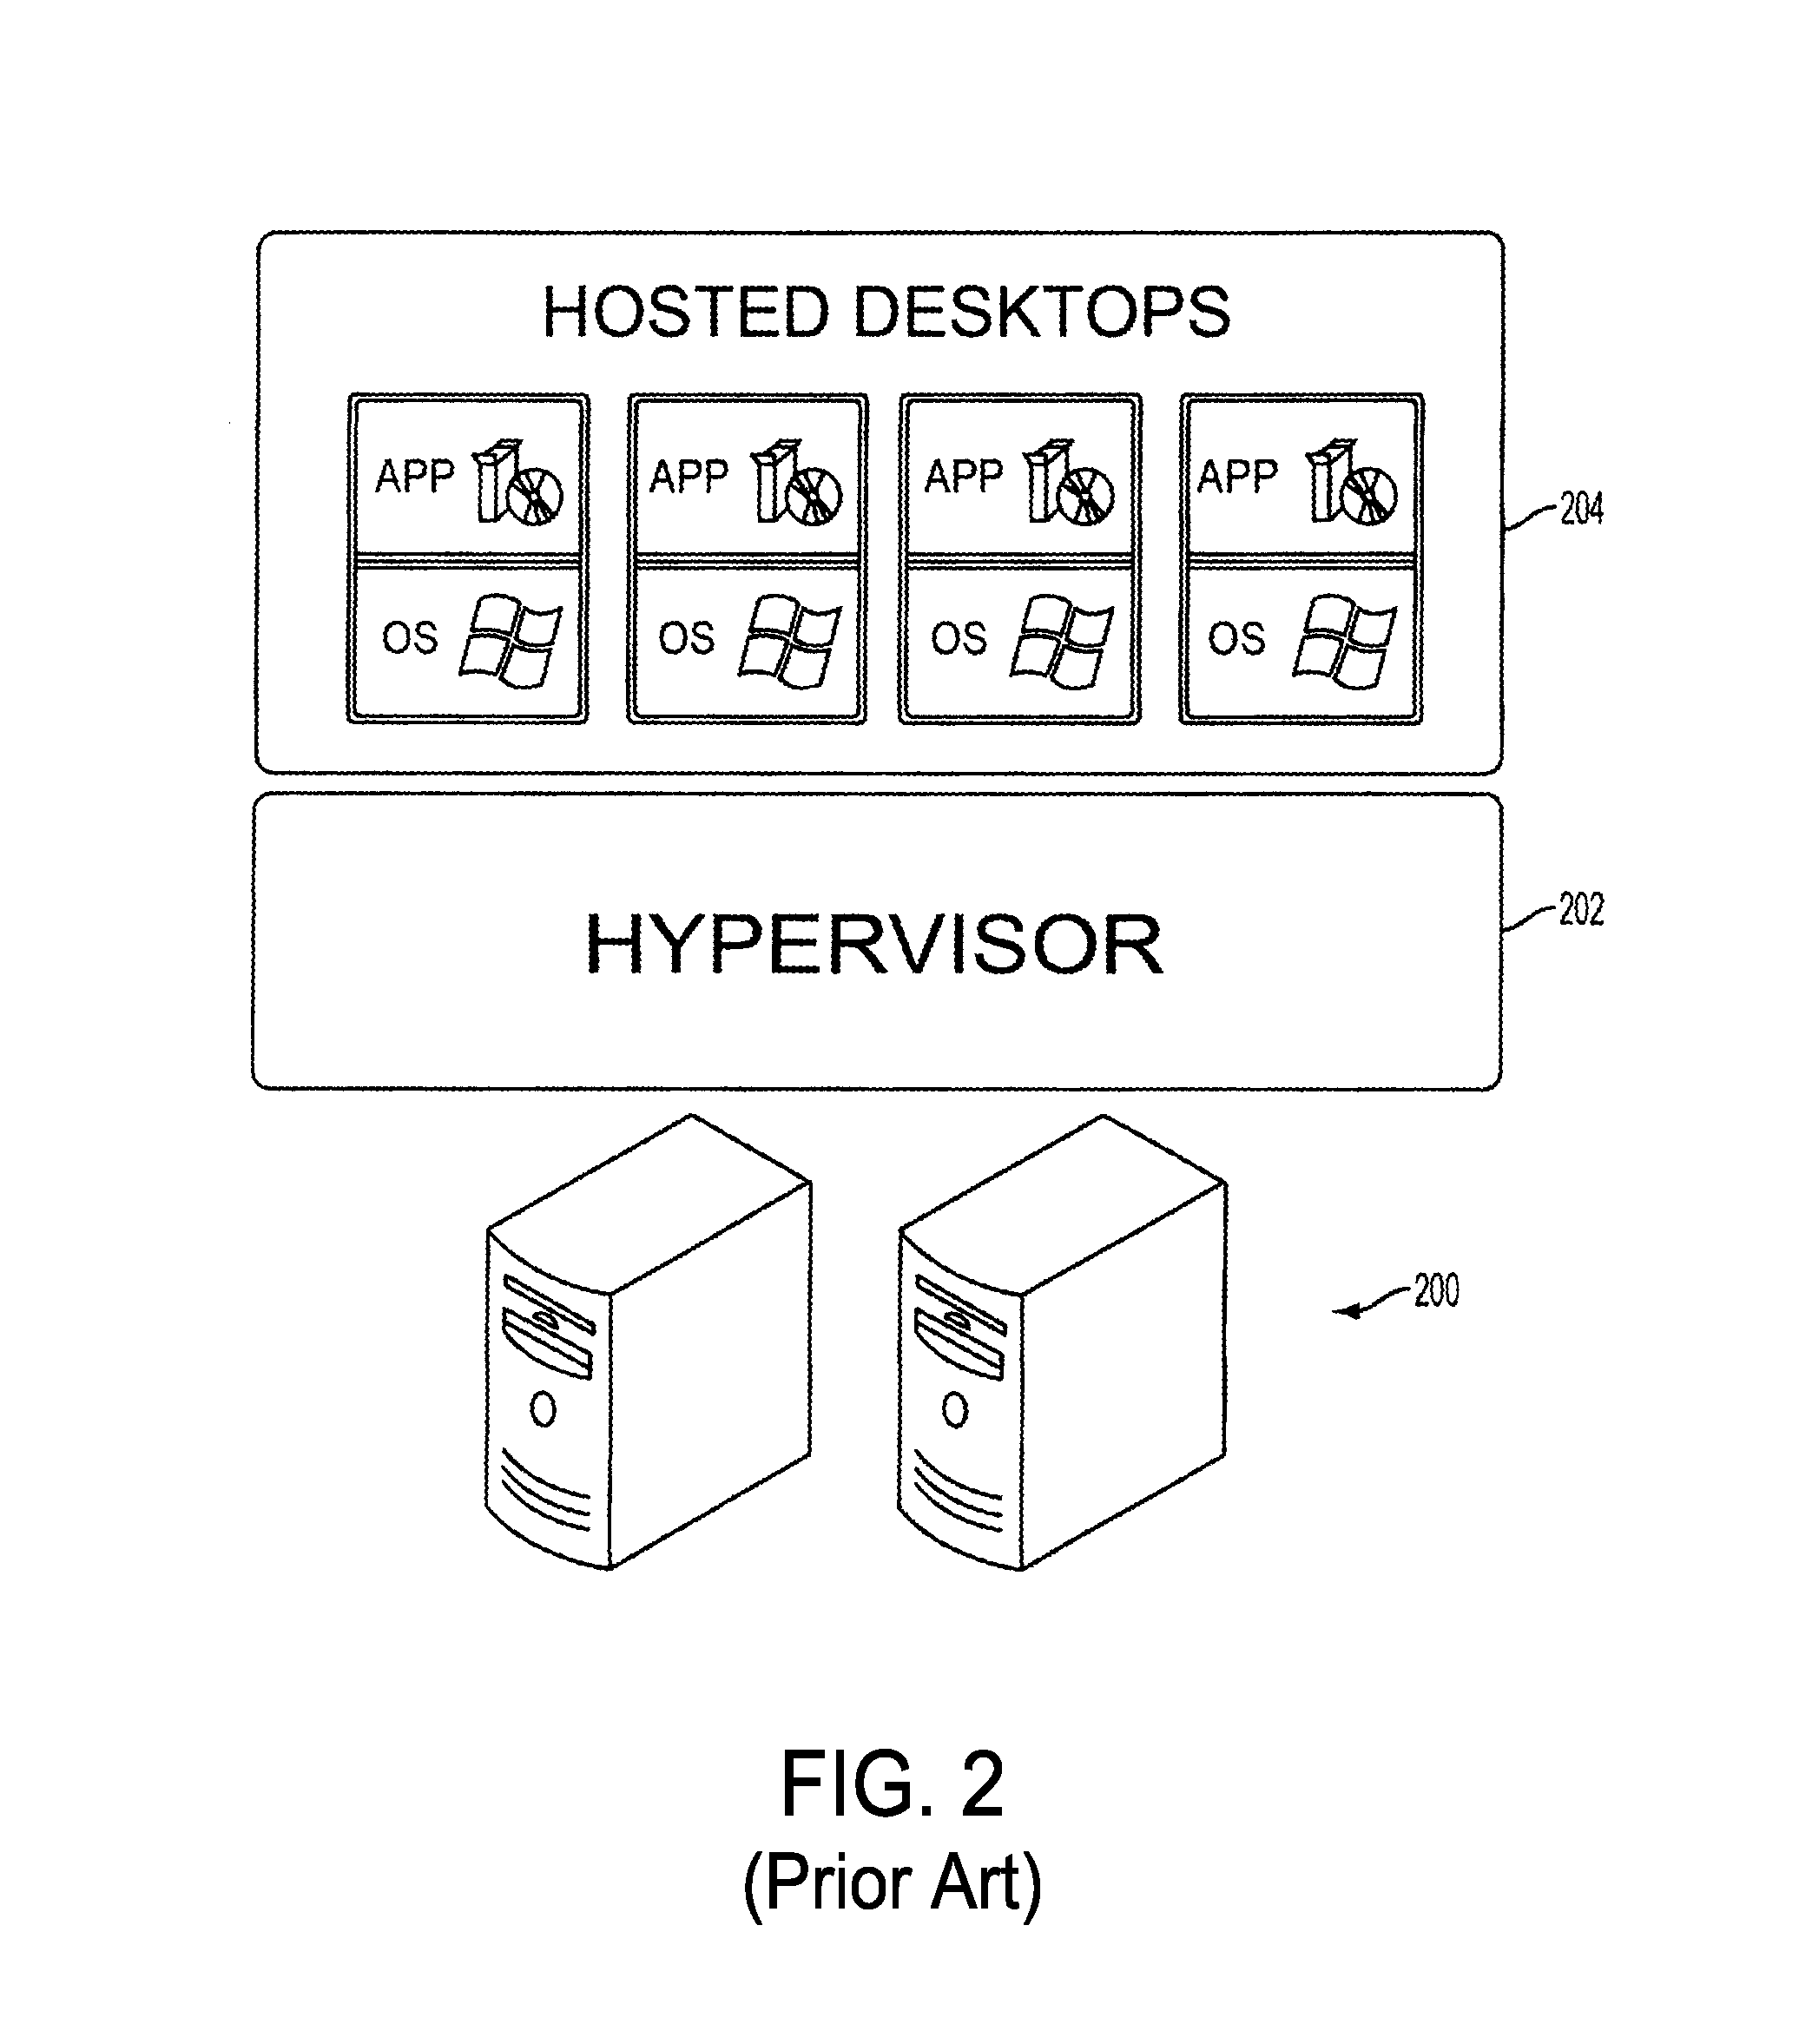 System for provisioning, allocating, and managing virtual and physical desktop computers in a network computing environment